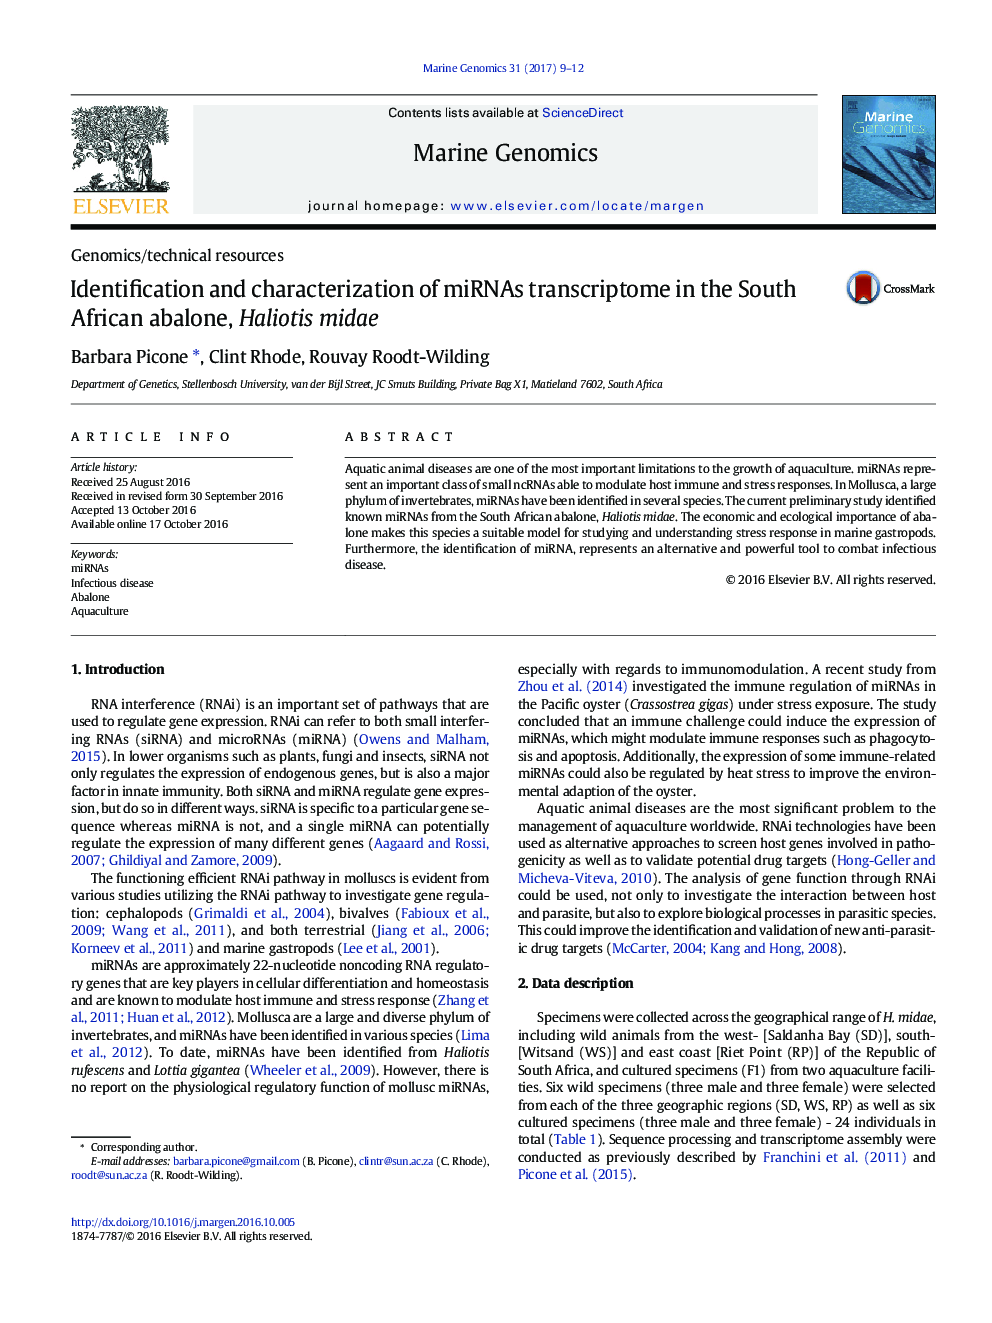 Genomics/technical resourcesIdentification and characterization of miRNAs transcriptome in the South African abalone, Haliotis midae